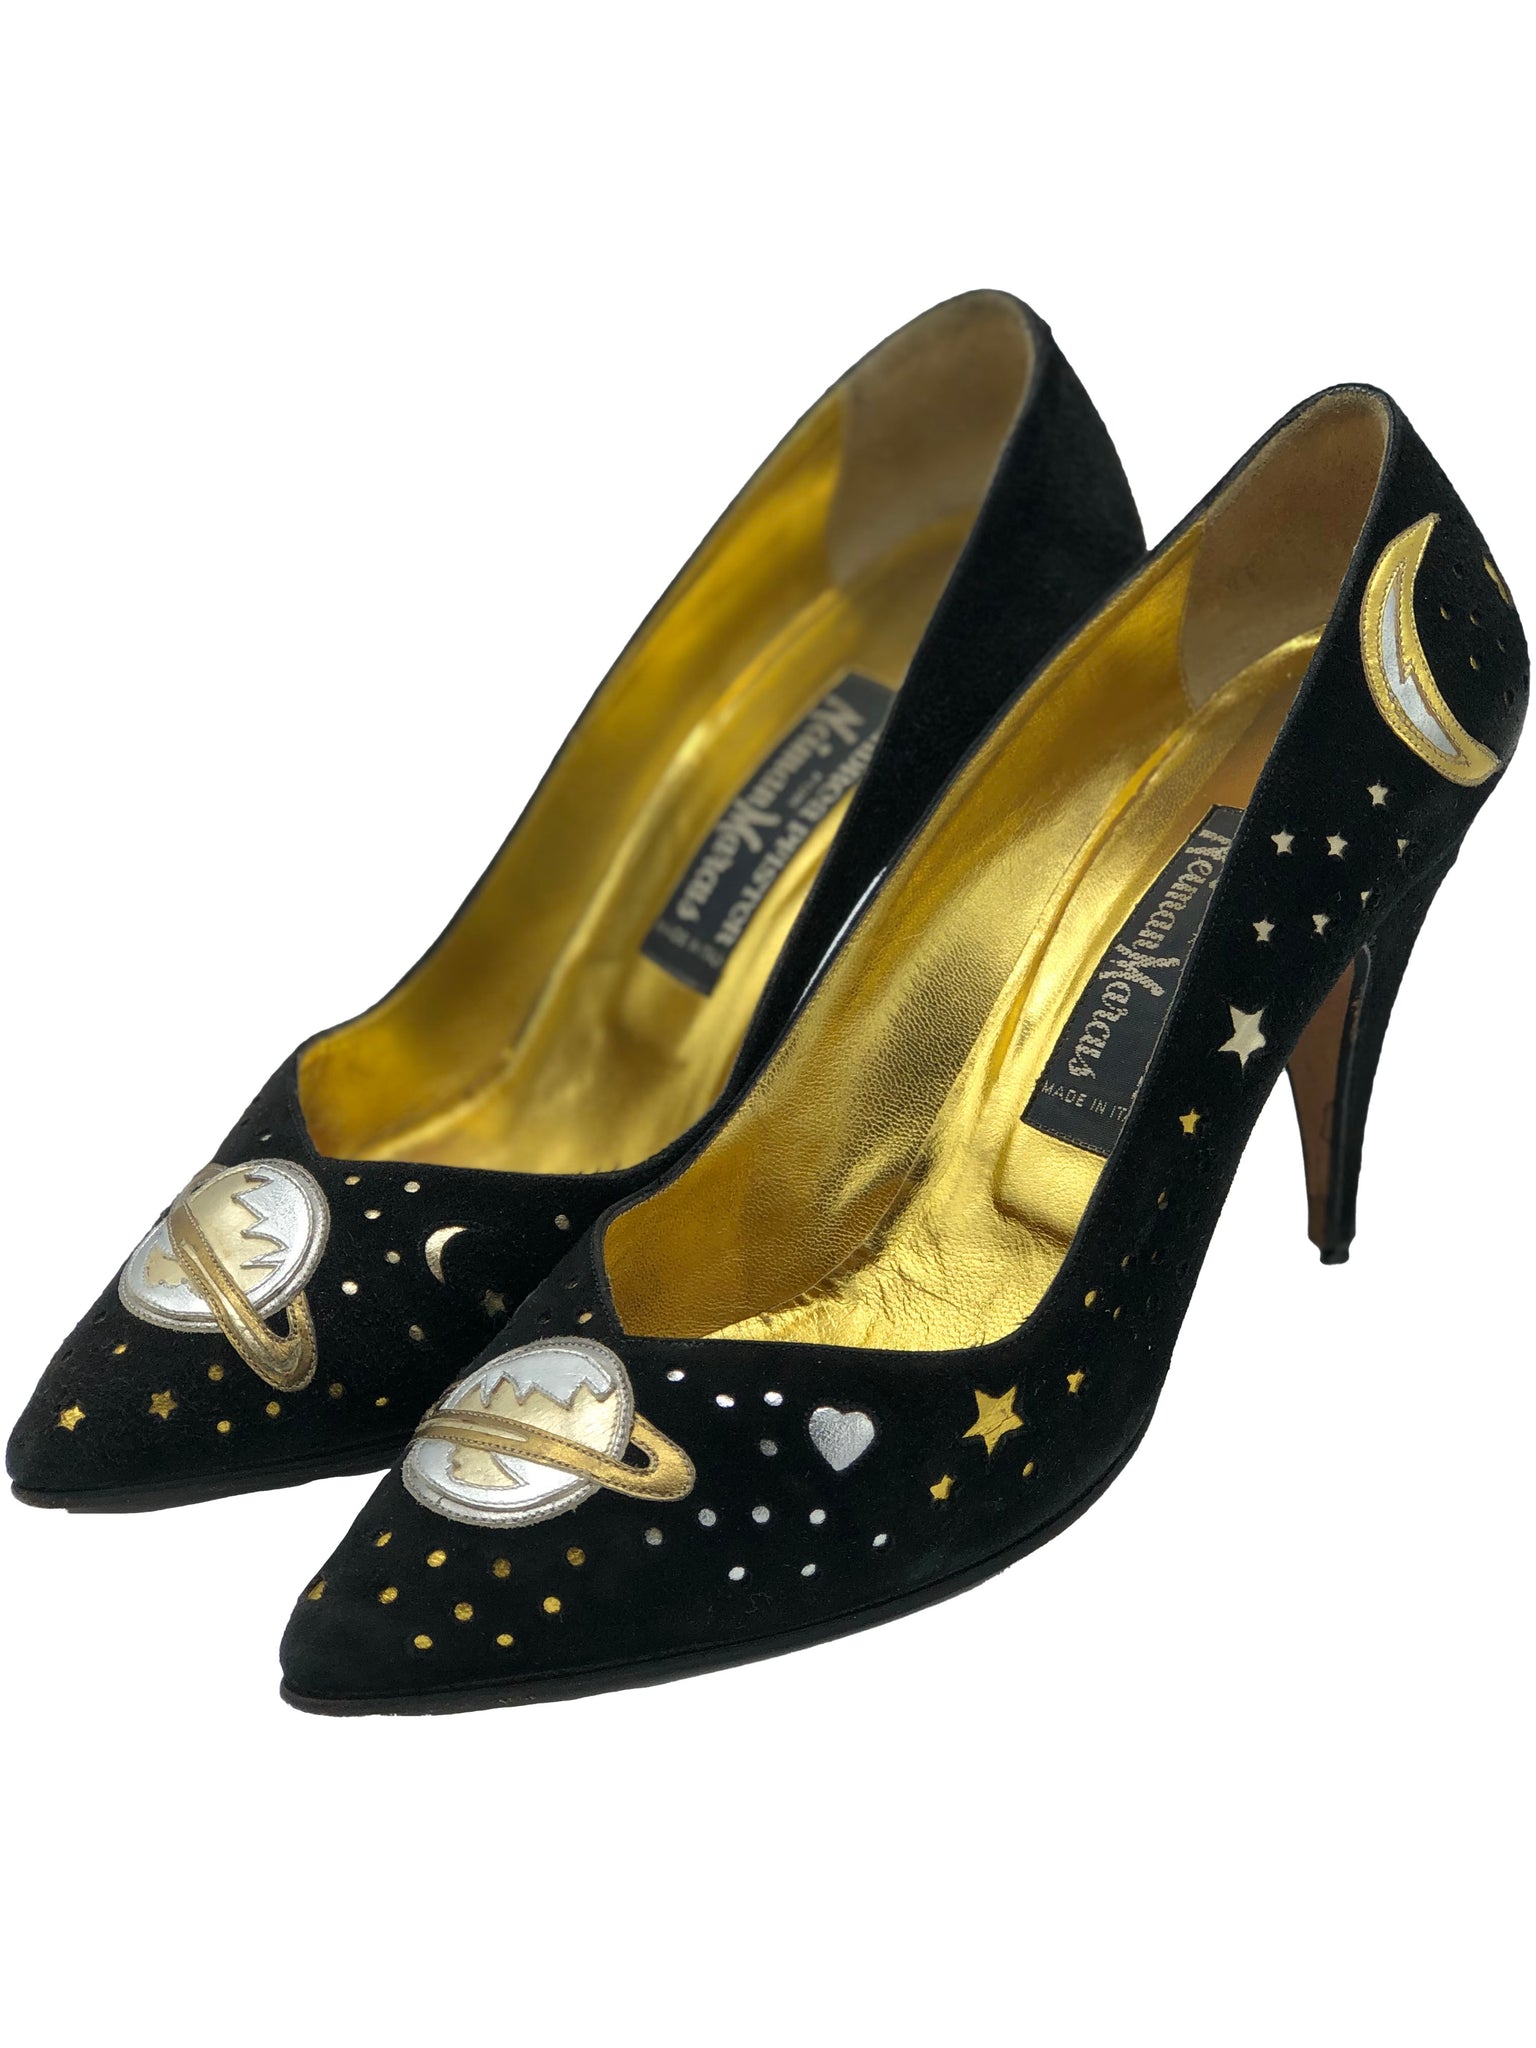 Andrea Pfister Magical Celestial Black Suede Pumps – THE WAY WE WORE